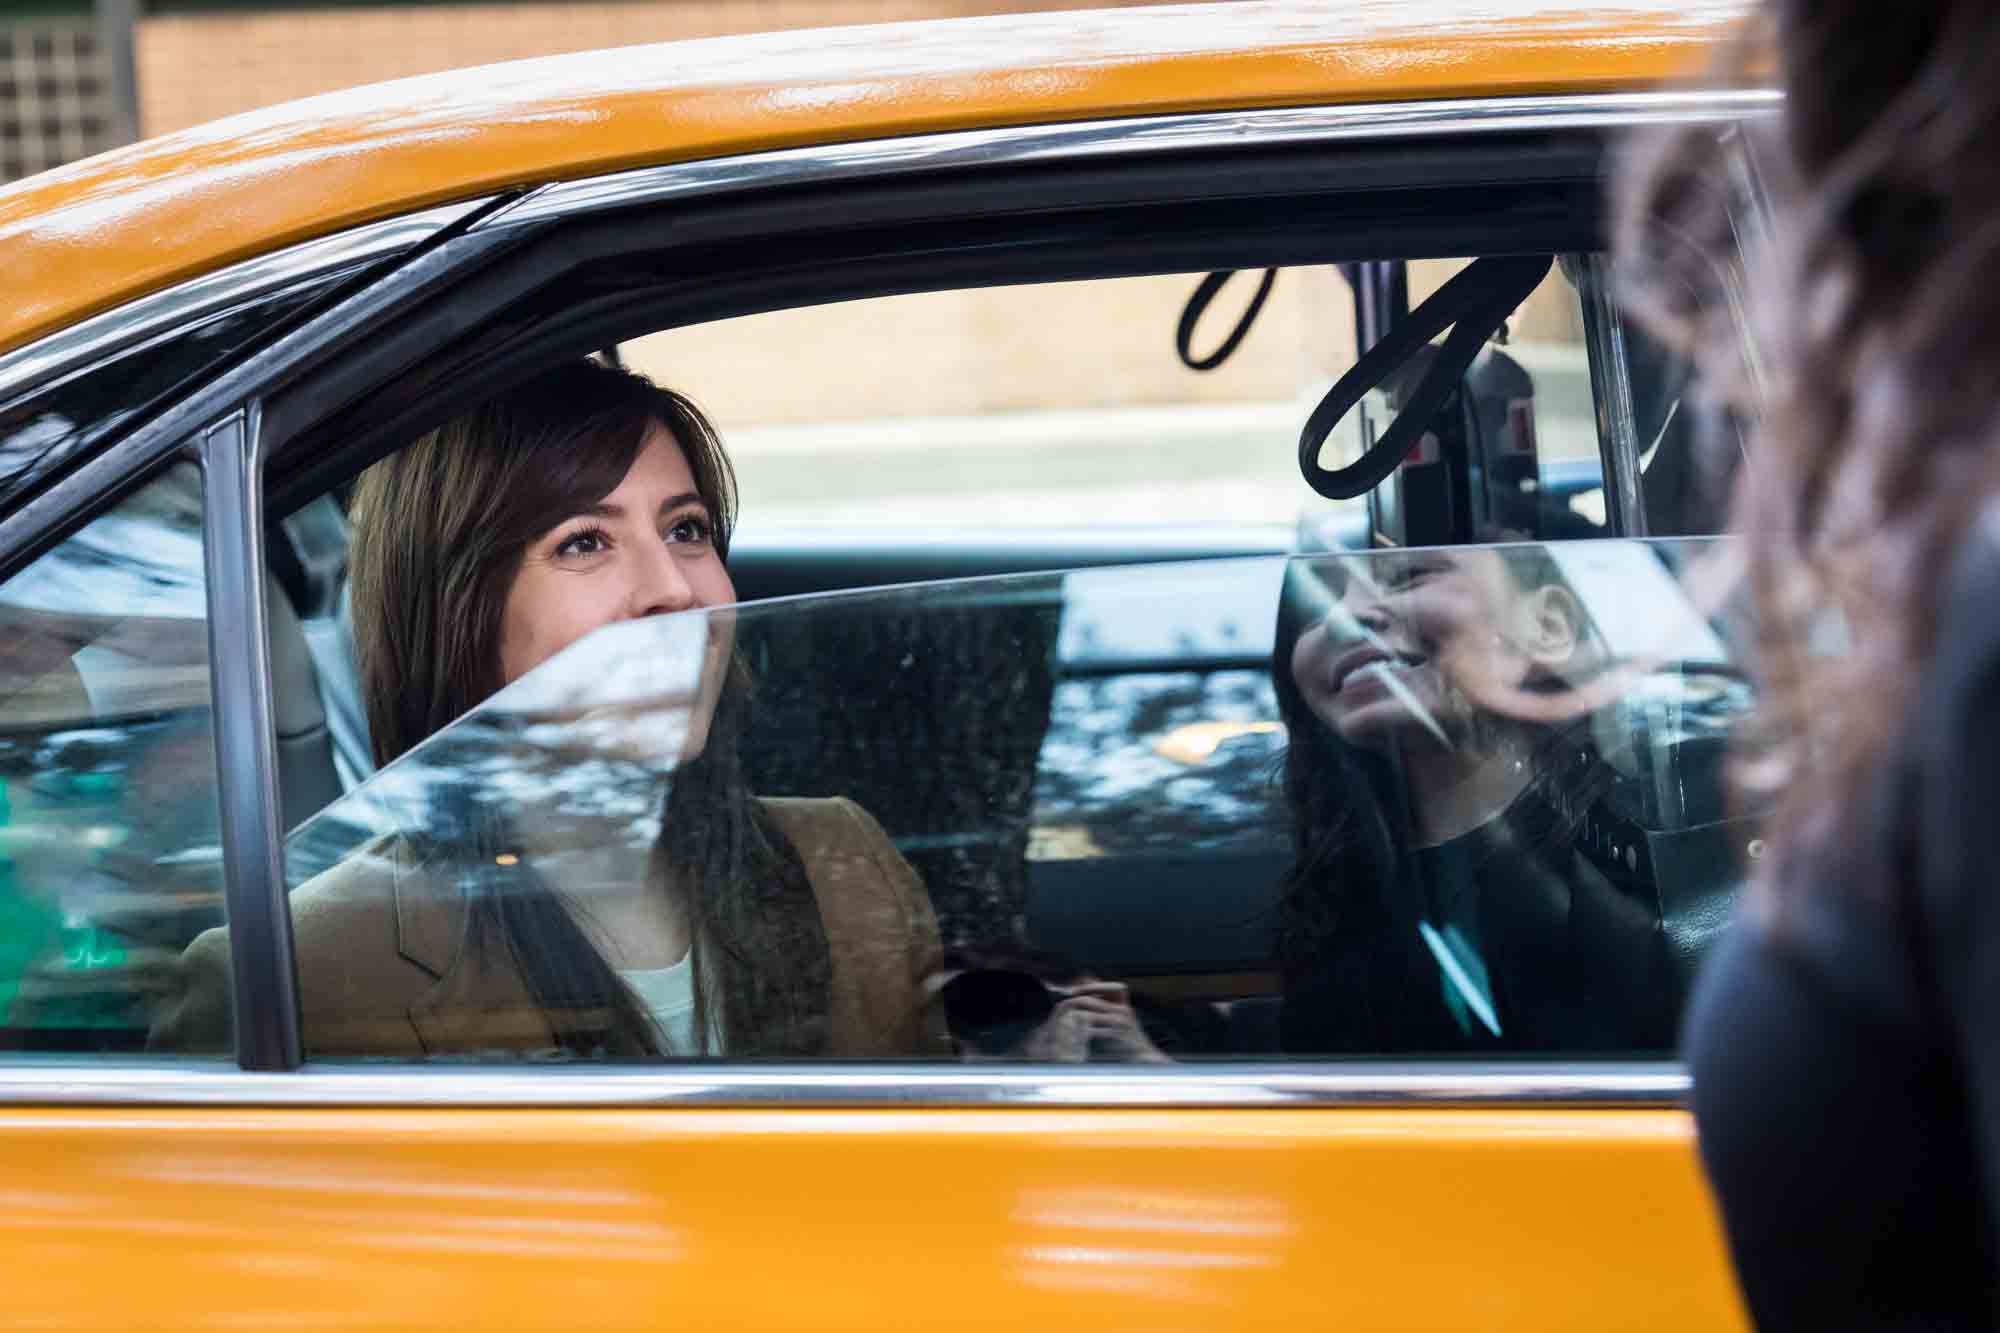 Woman in yellow taxi cab smiling through the window at another woman reflected in the window